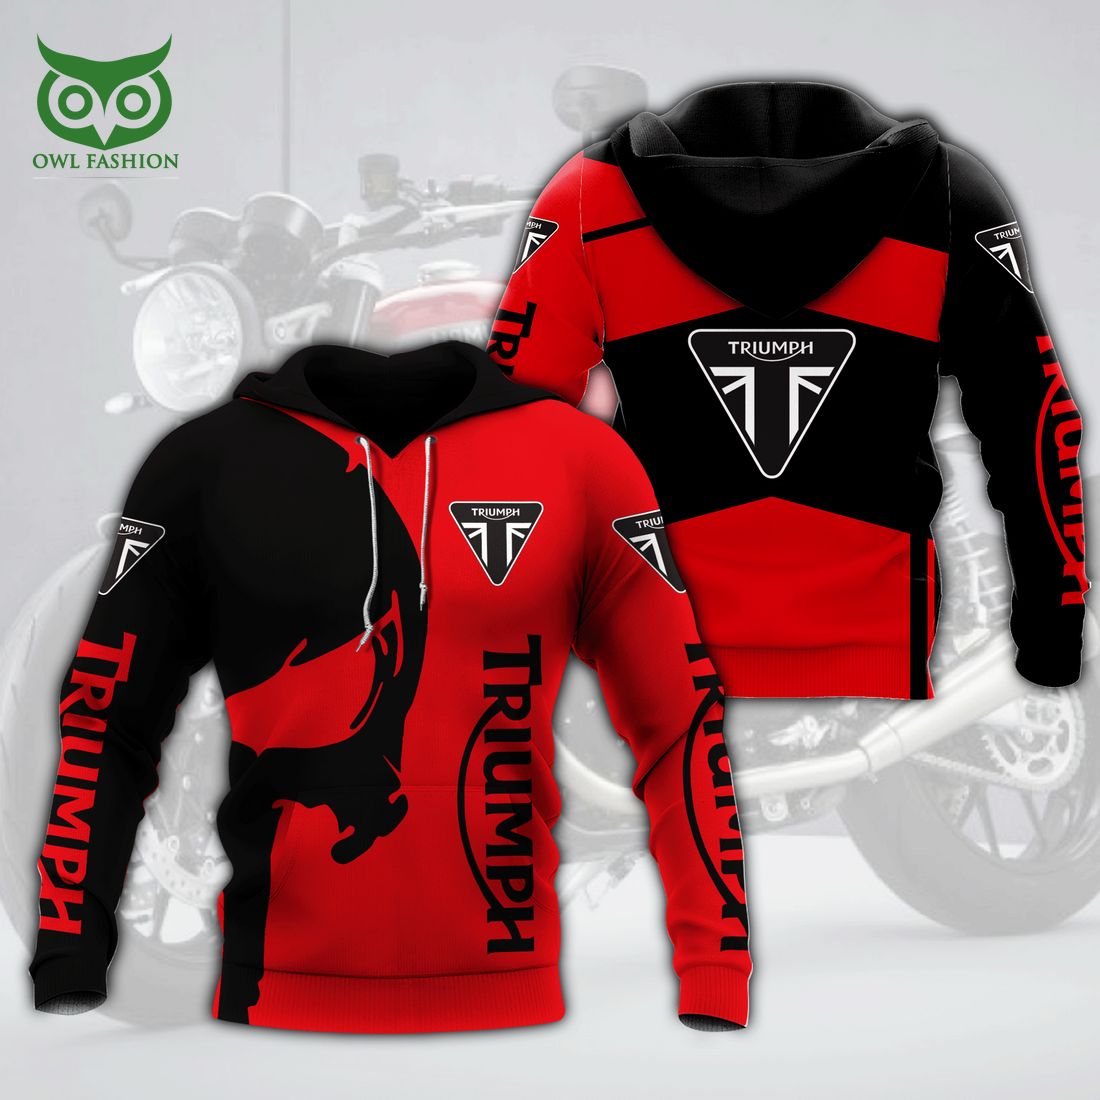 triumph motorcycles black and red logo 3d shirt 1 UhIW1